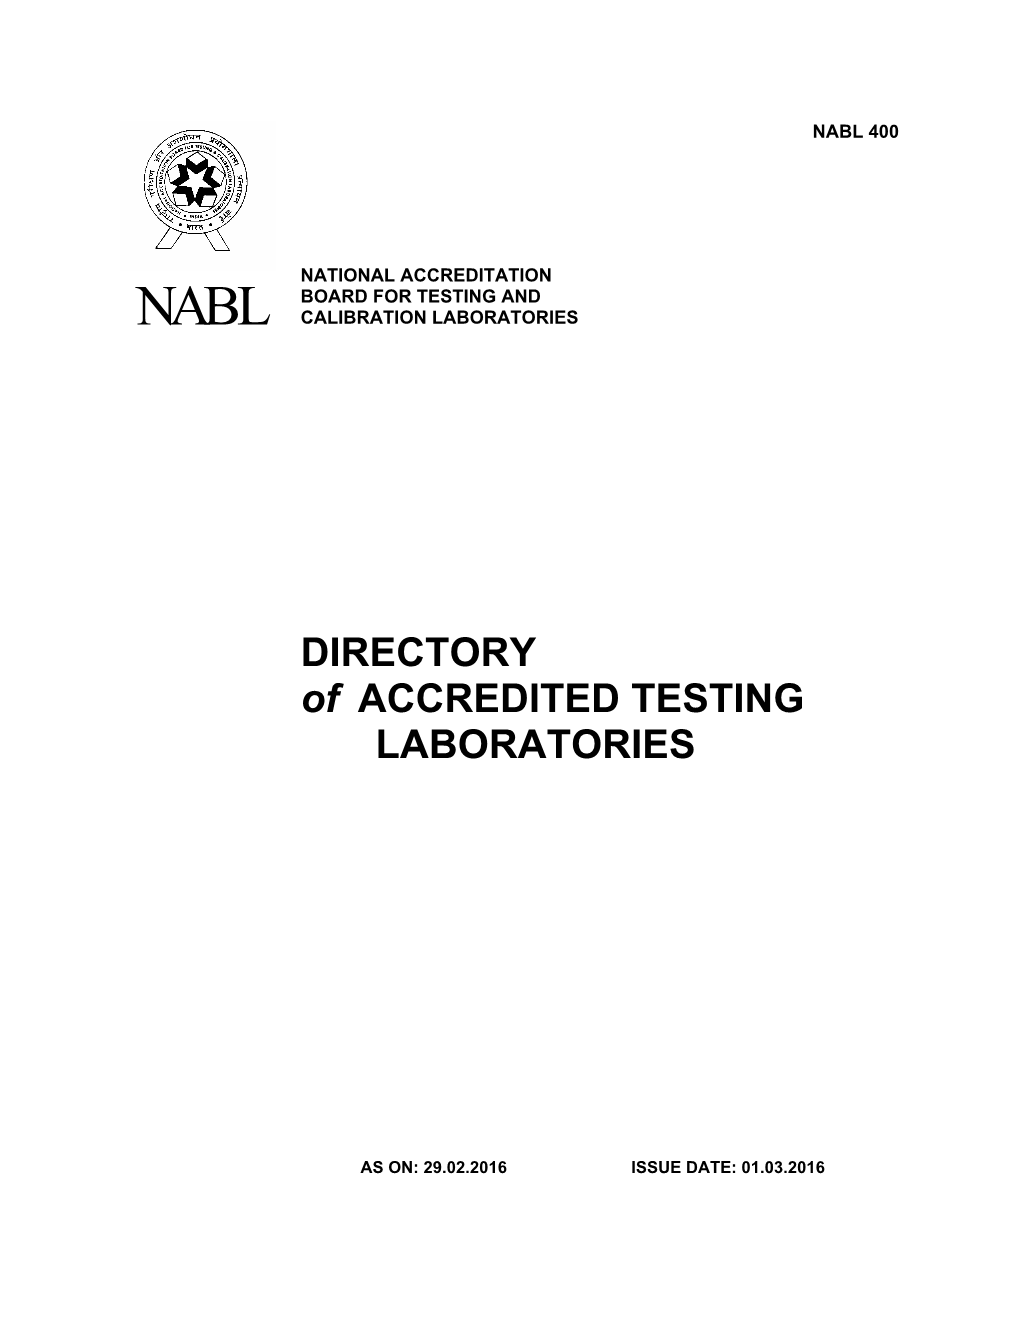 DIRECTORY of ACCREDITED TESTING LABORATORIES